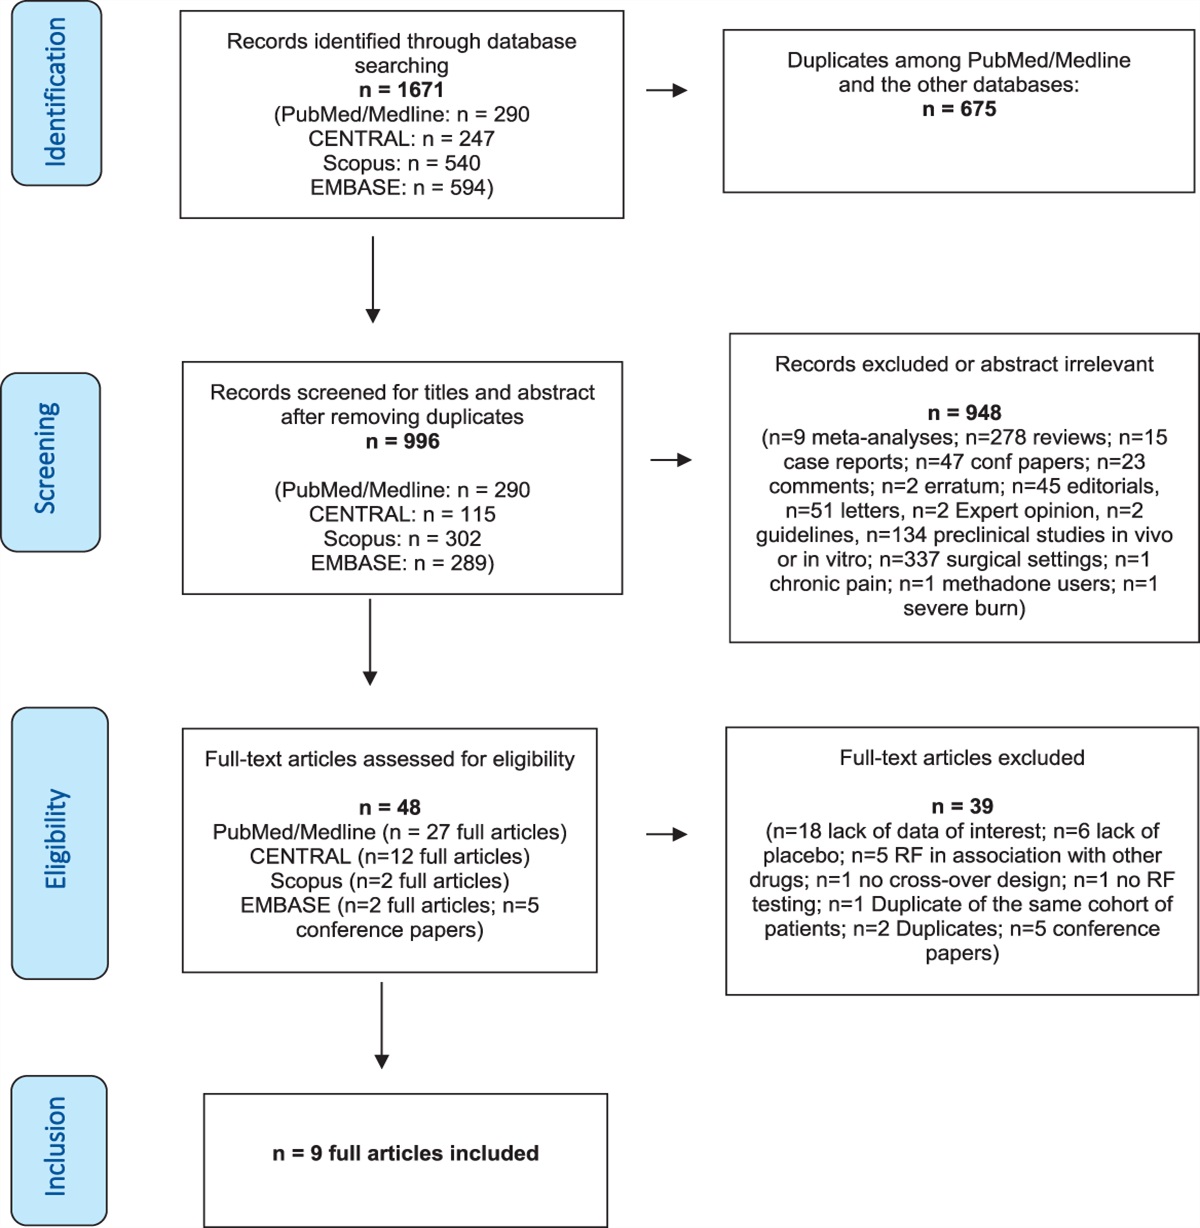 Remifentanil-induced hyperalgesia in healthy volunteers: a systematic review and meta-analysis of randomized controlled trials